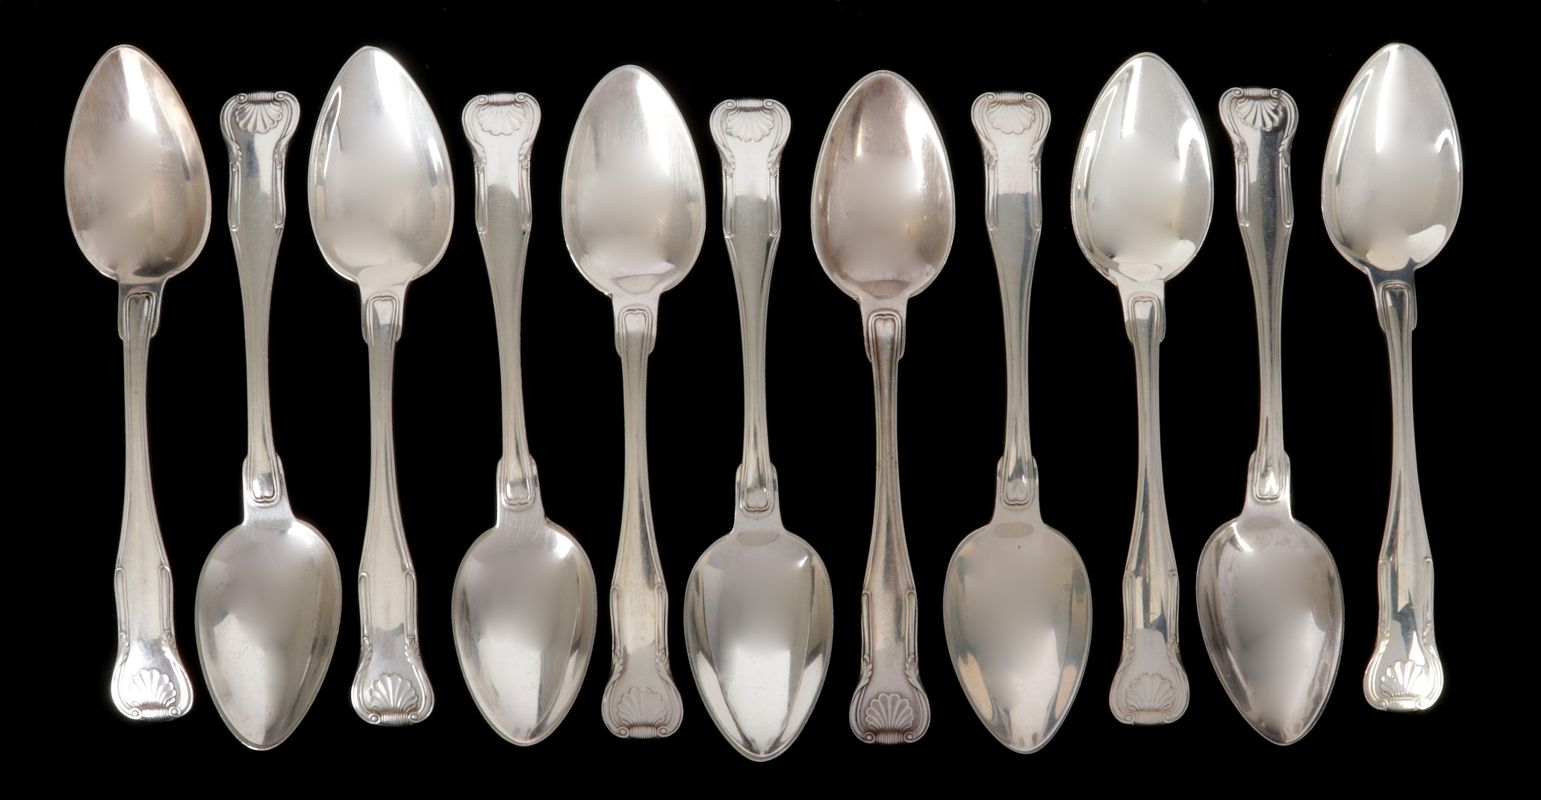 S. KIRK AND SON SPOONS IN SON AND KING PATTERN